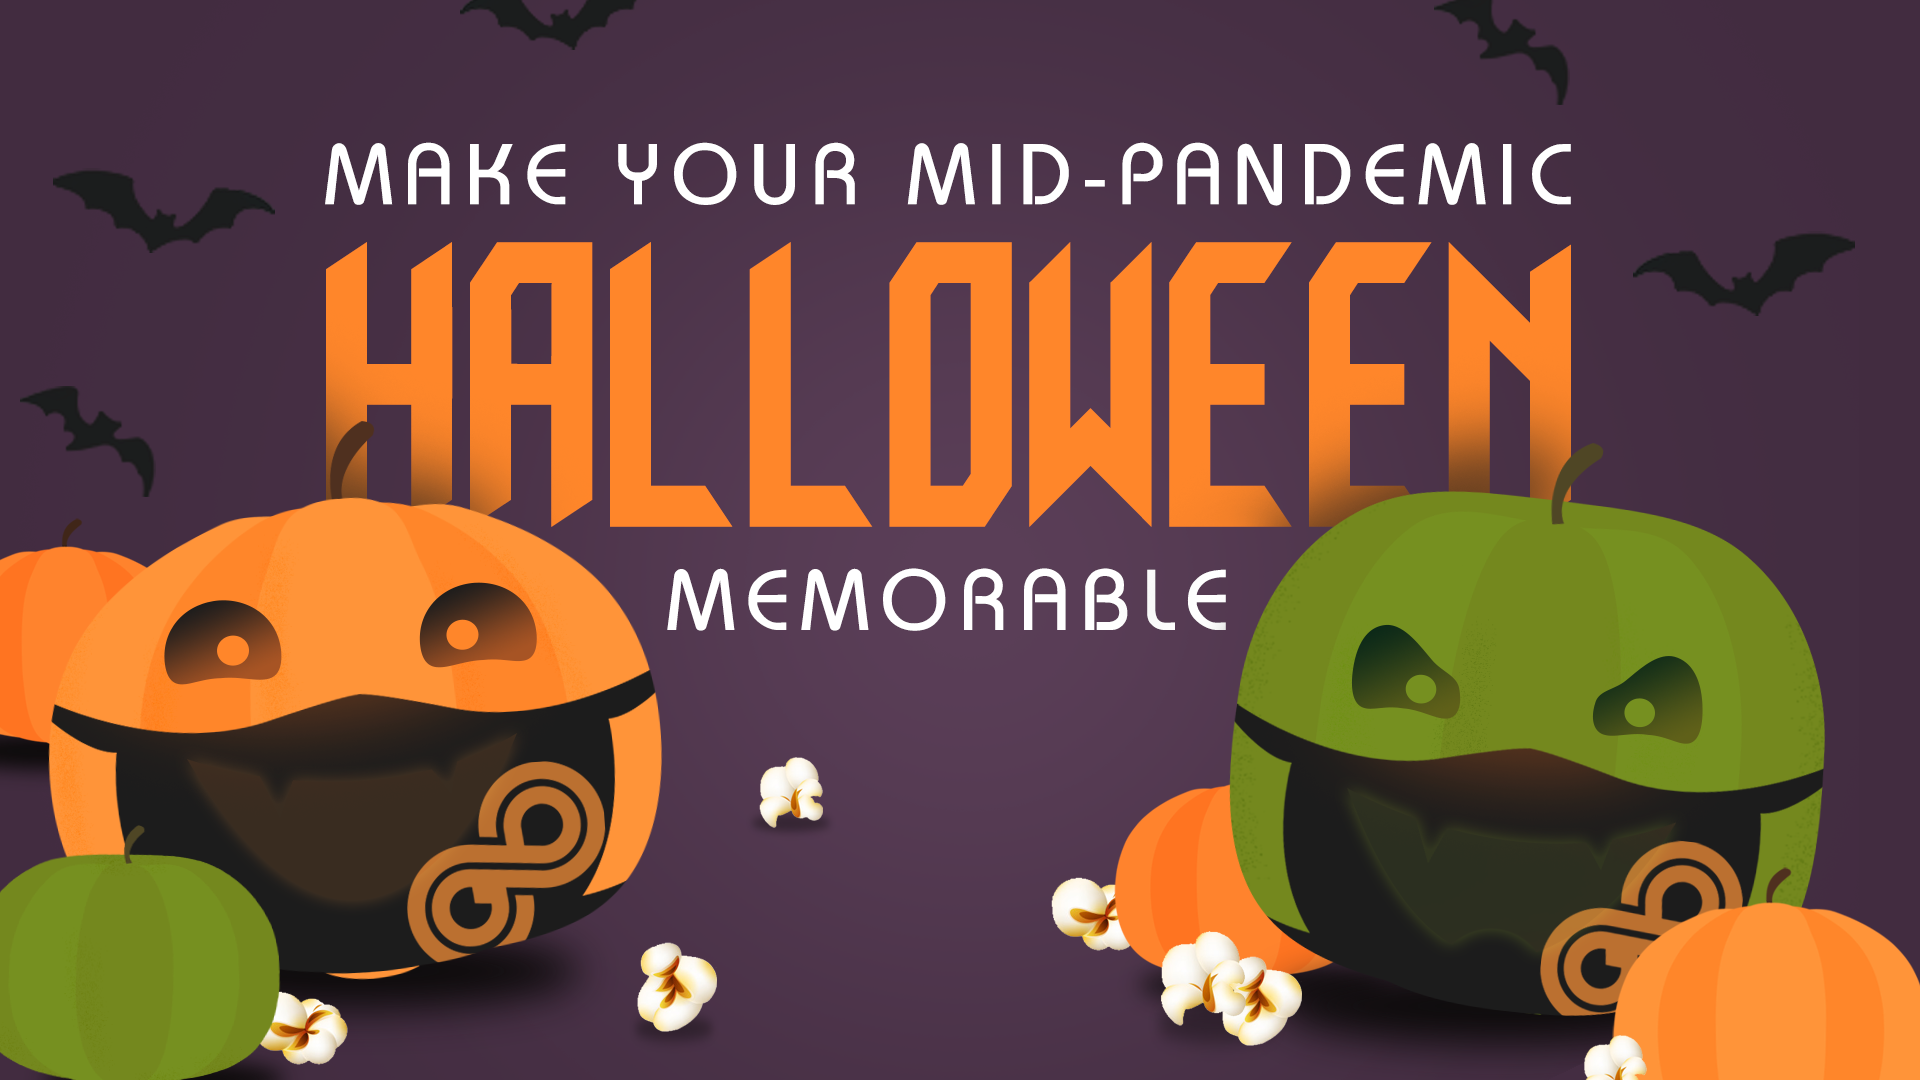 How To Make your mid-pandemic Halloween 2020 Memorable? A Simple Spooky Guide